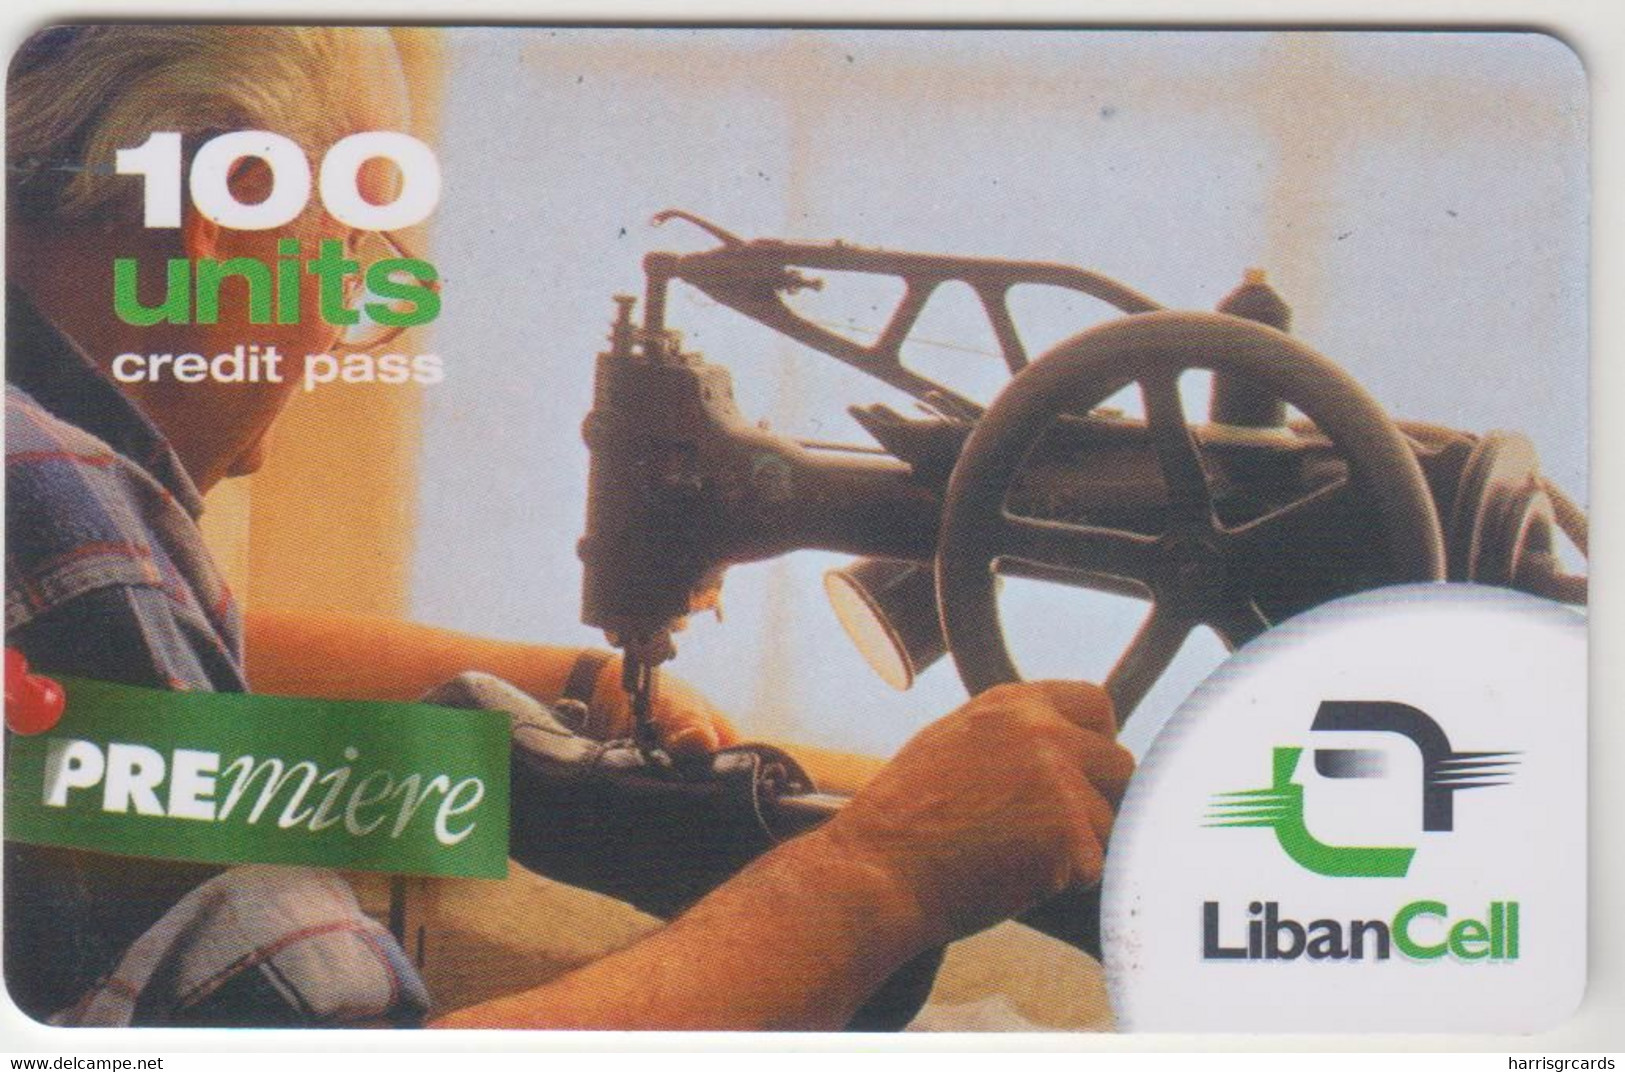 LEBANON - Premiere - Sewing Machine, Libancell Recharge Card 100 Units, Exp.date 27/01/06, Used - Líbano